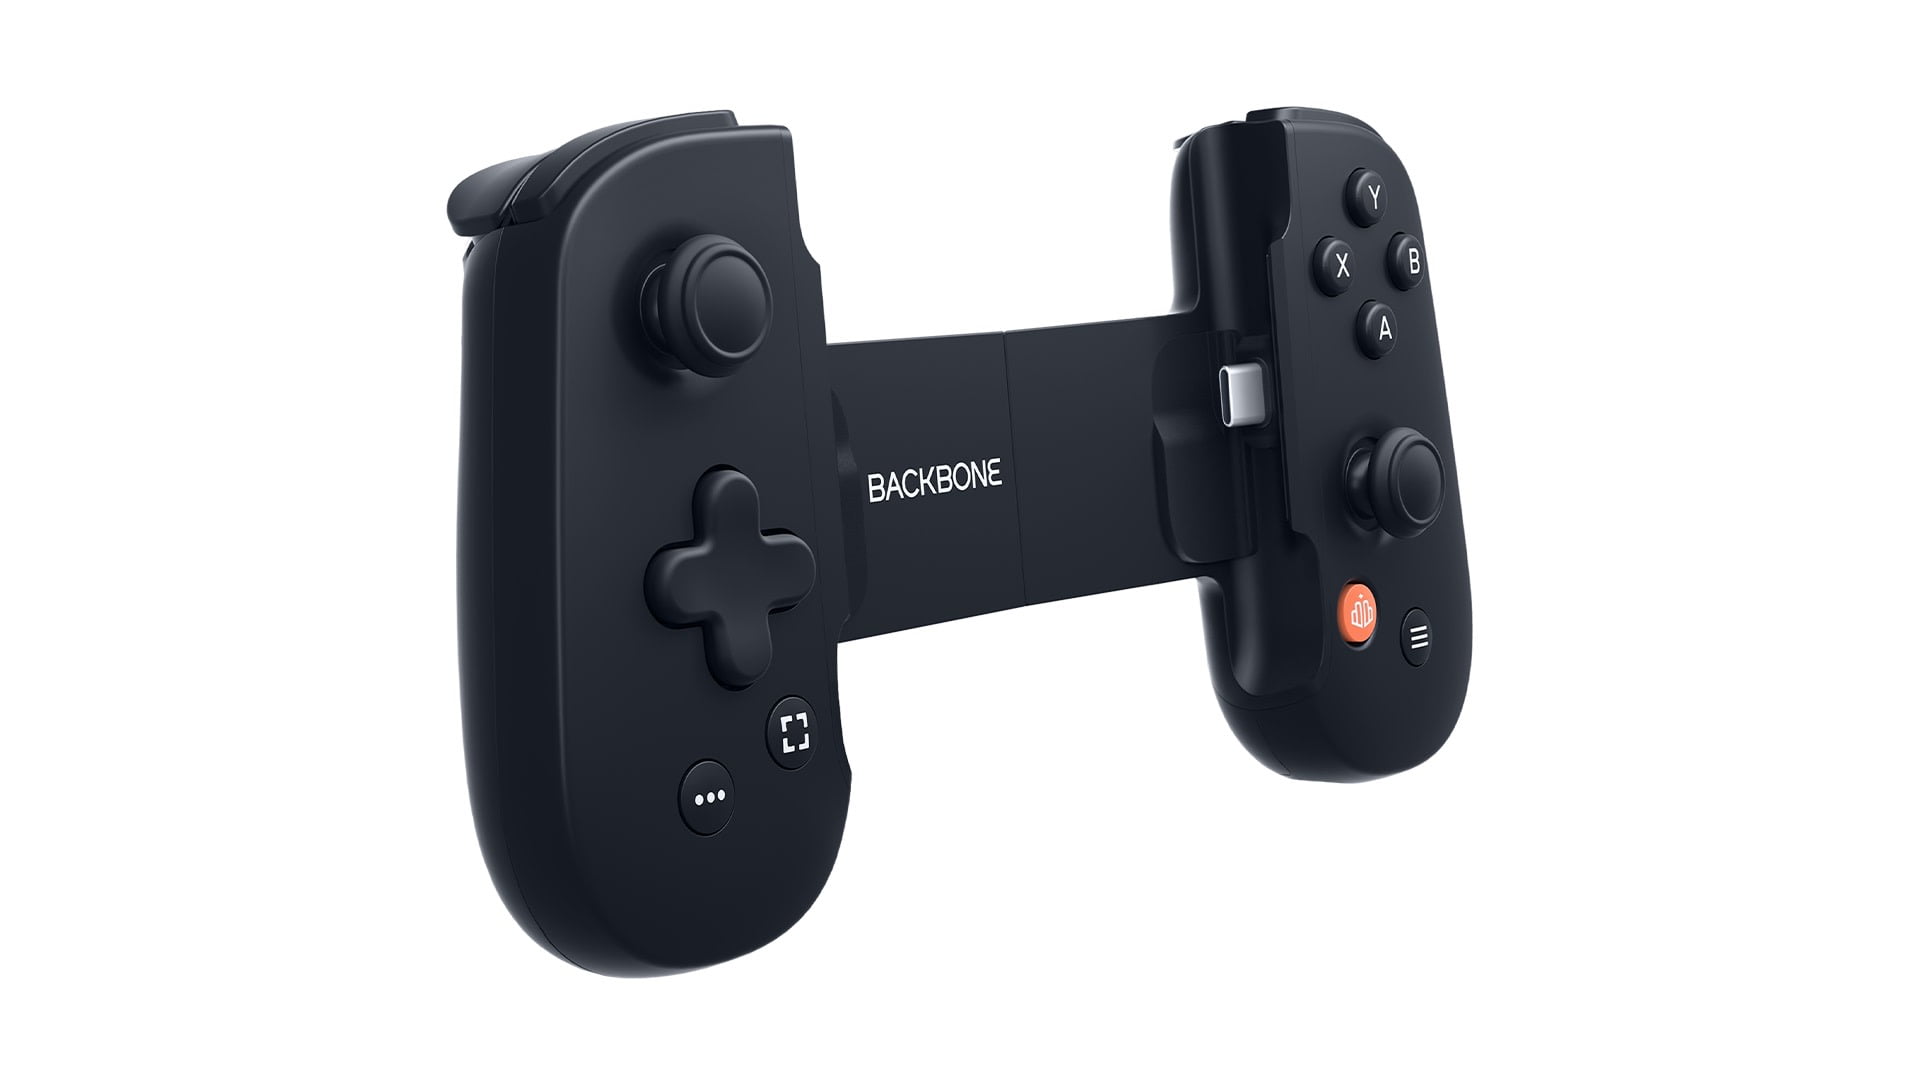 Backbone One Mobile Gaming Controller for Android - Black (USB-C) / NEW J1  850041963006